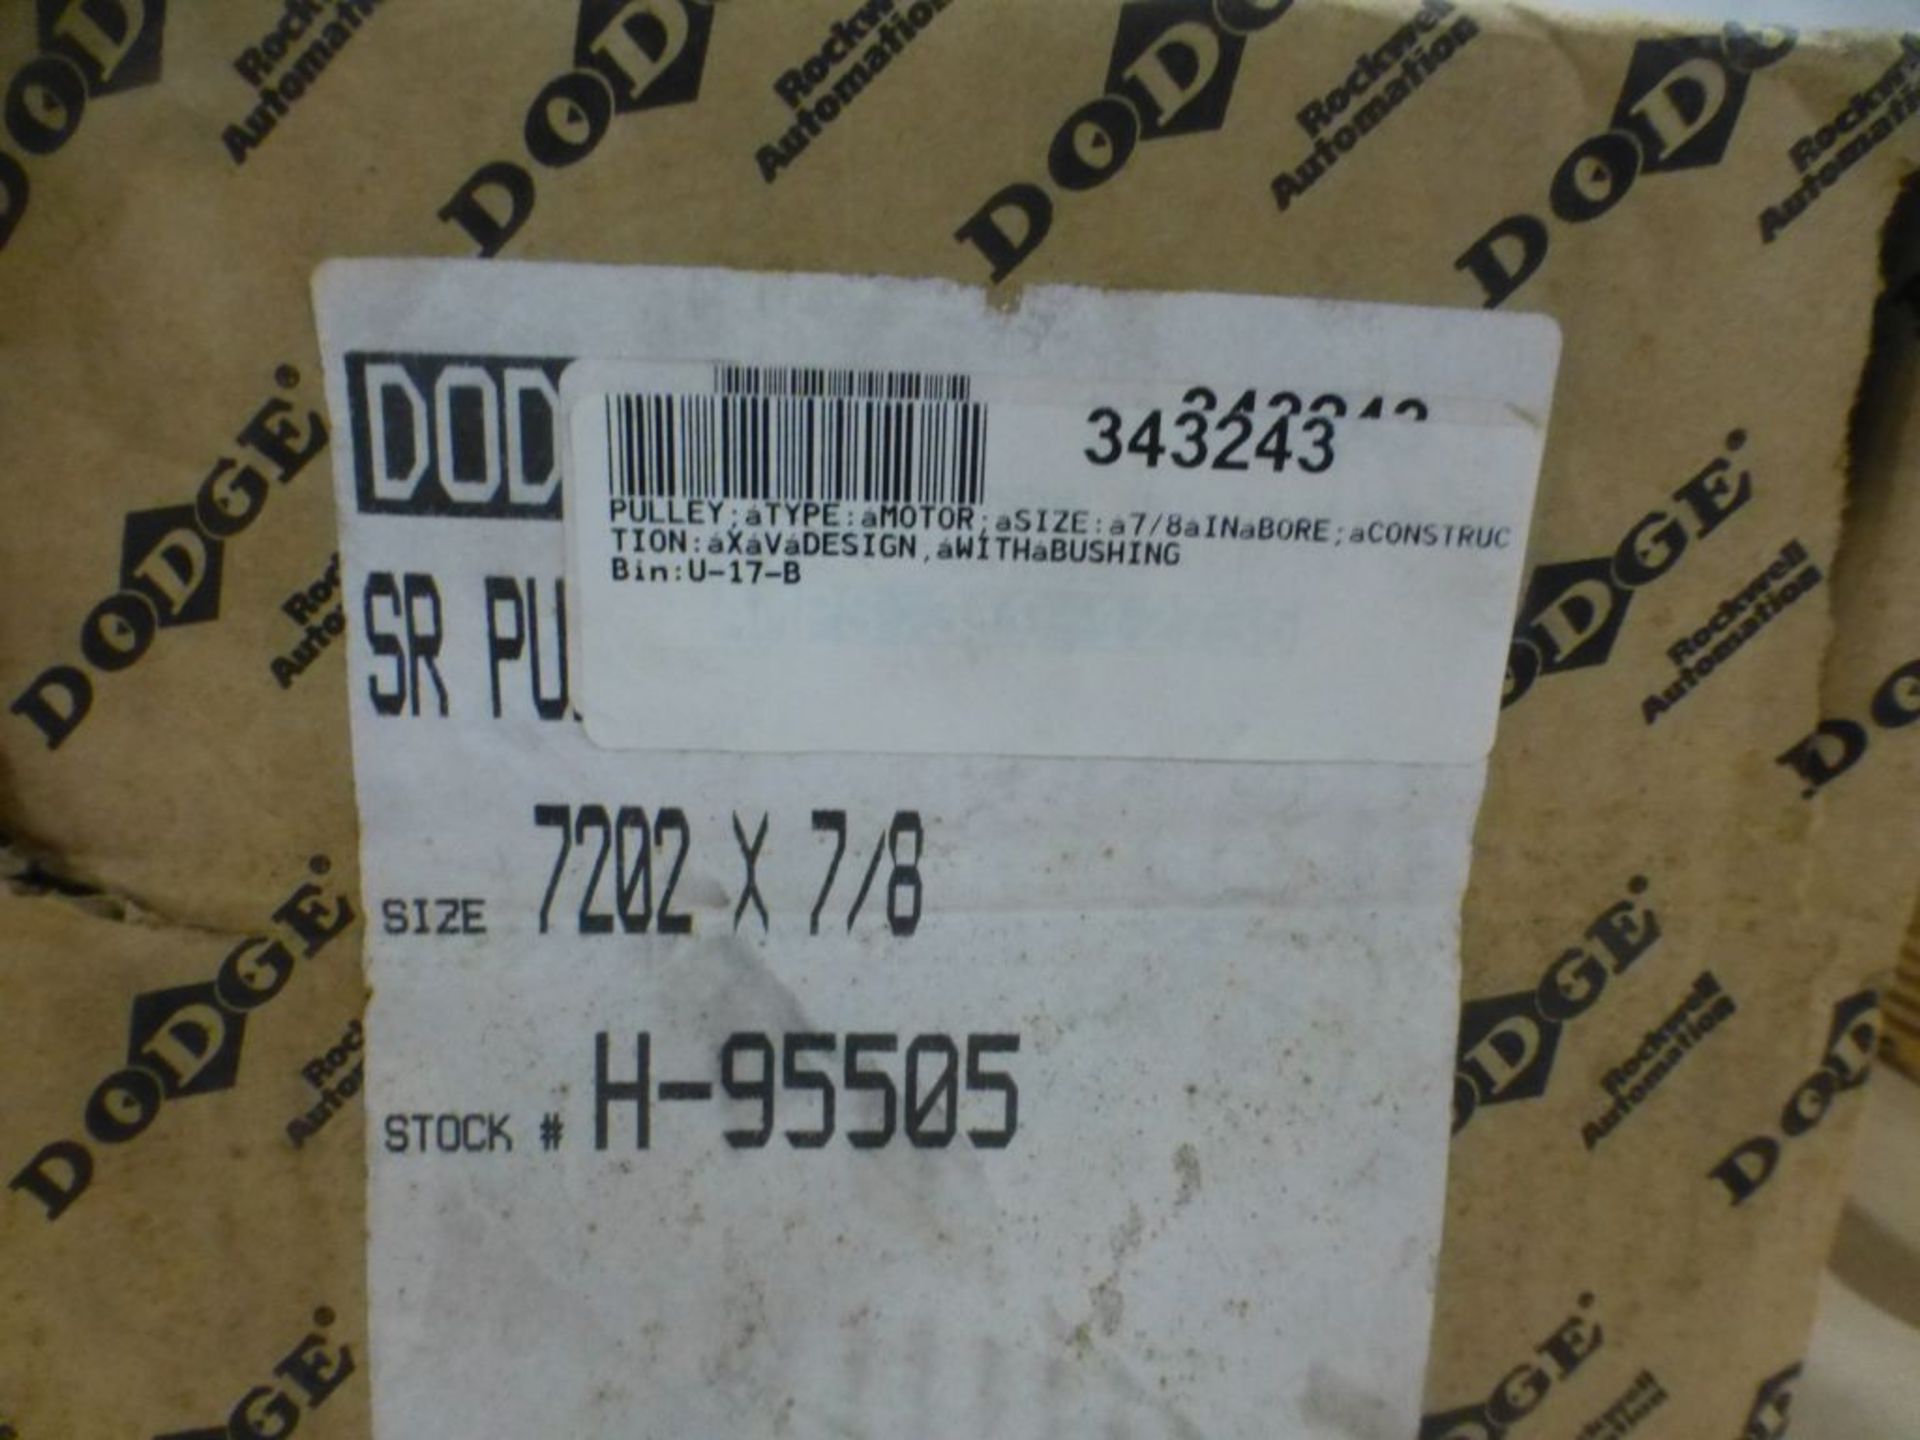 Lot of (2) Assorted Components|(1) HPI Tandem Pump Gear; Reeves Pulley Motor|Lot Loading Fee: $5.00 - Image 9 of 9